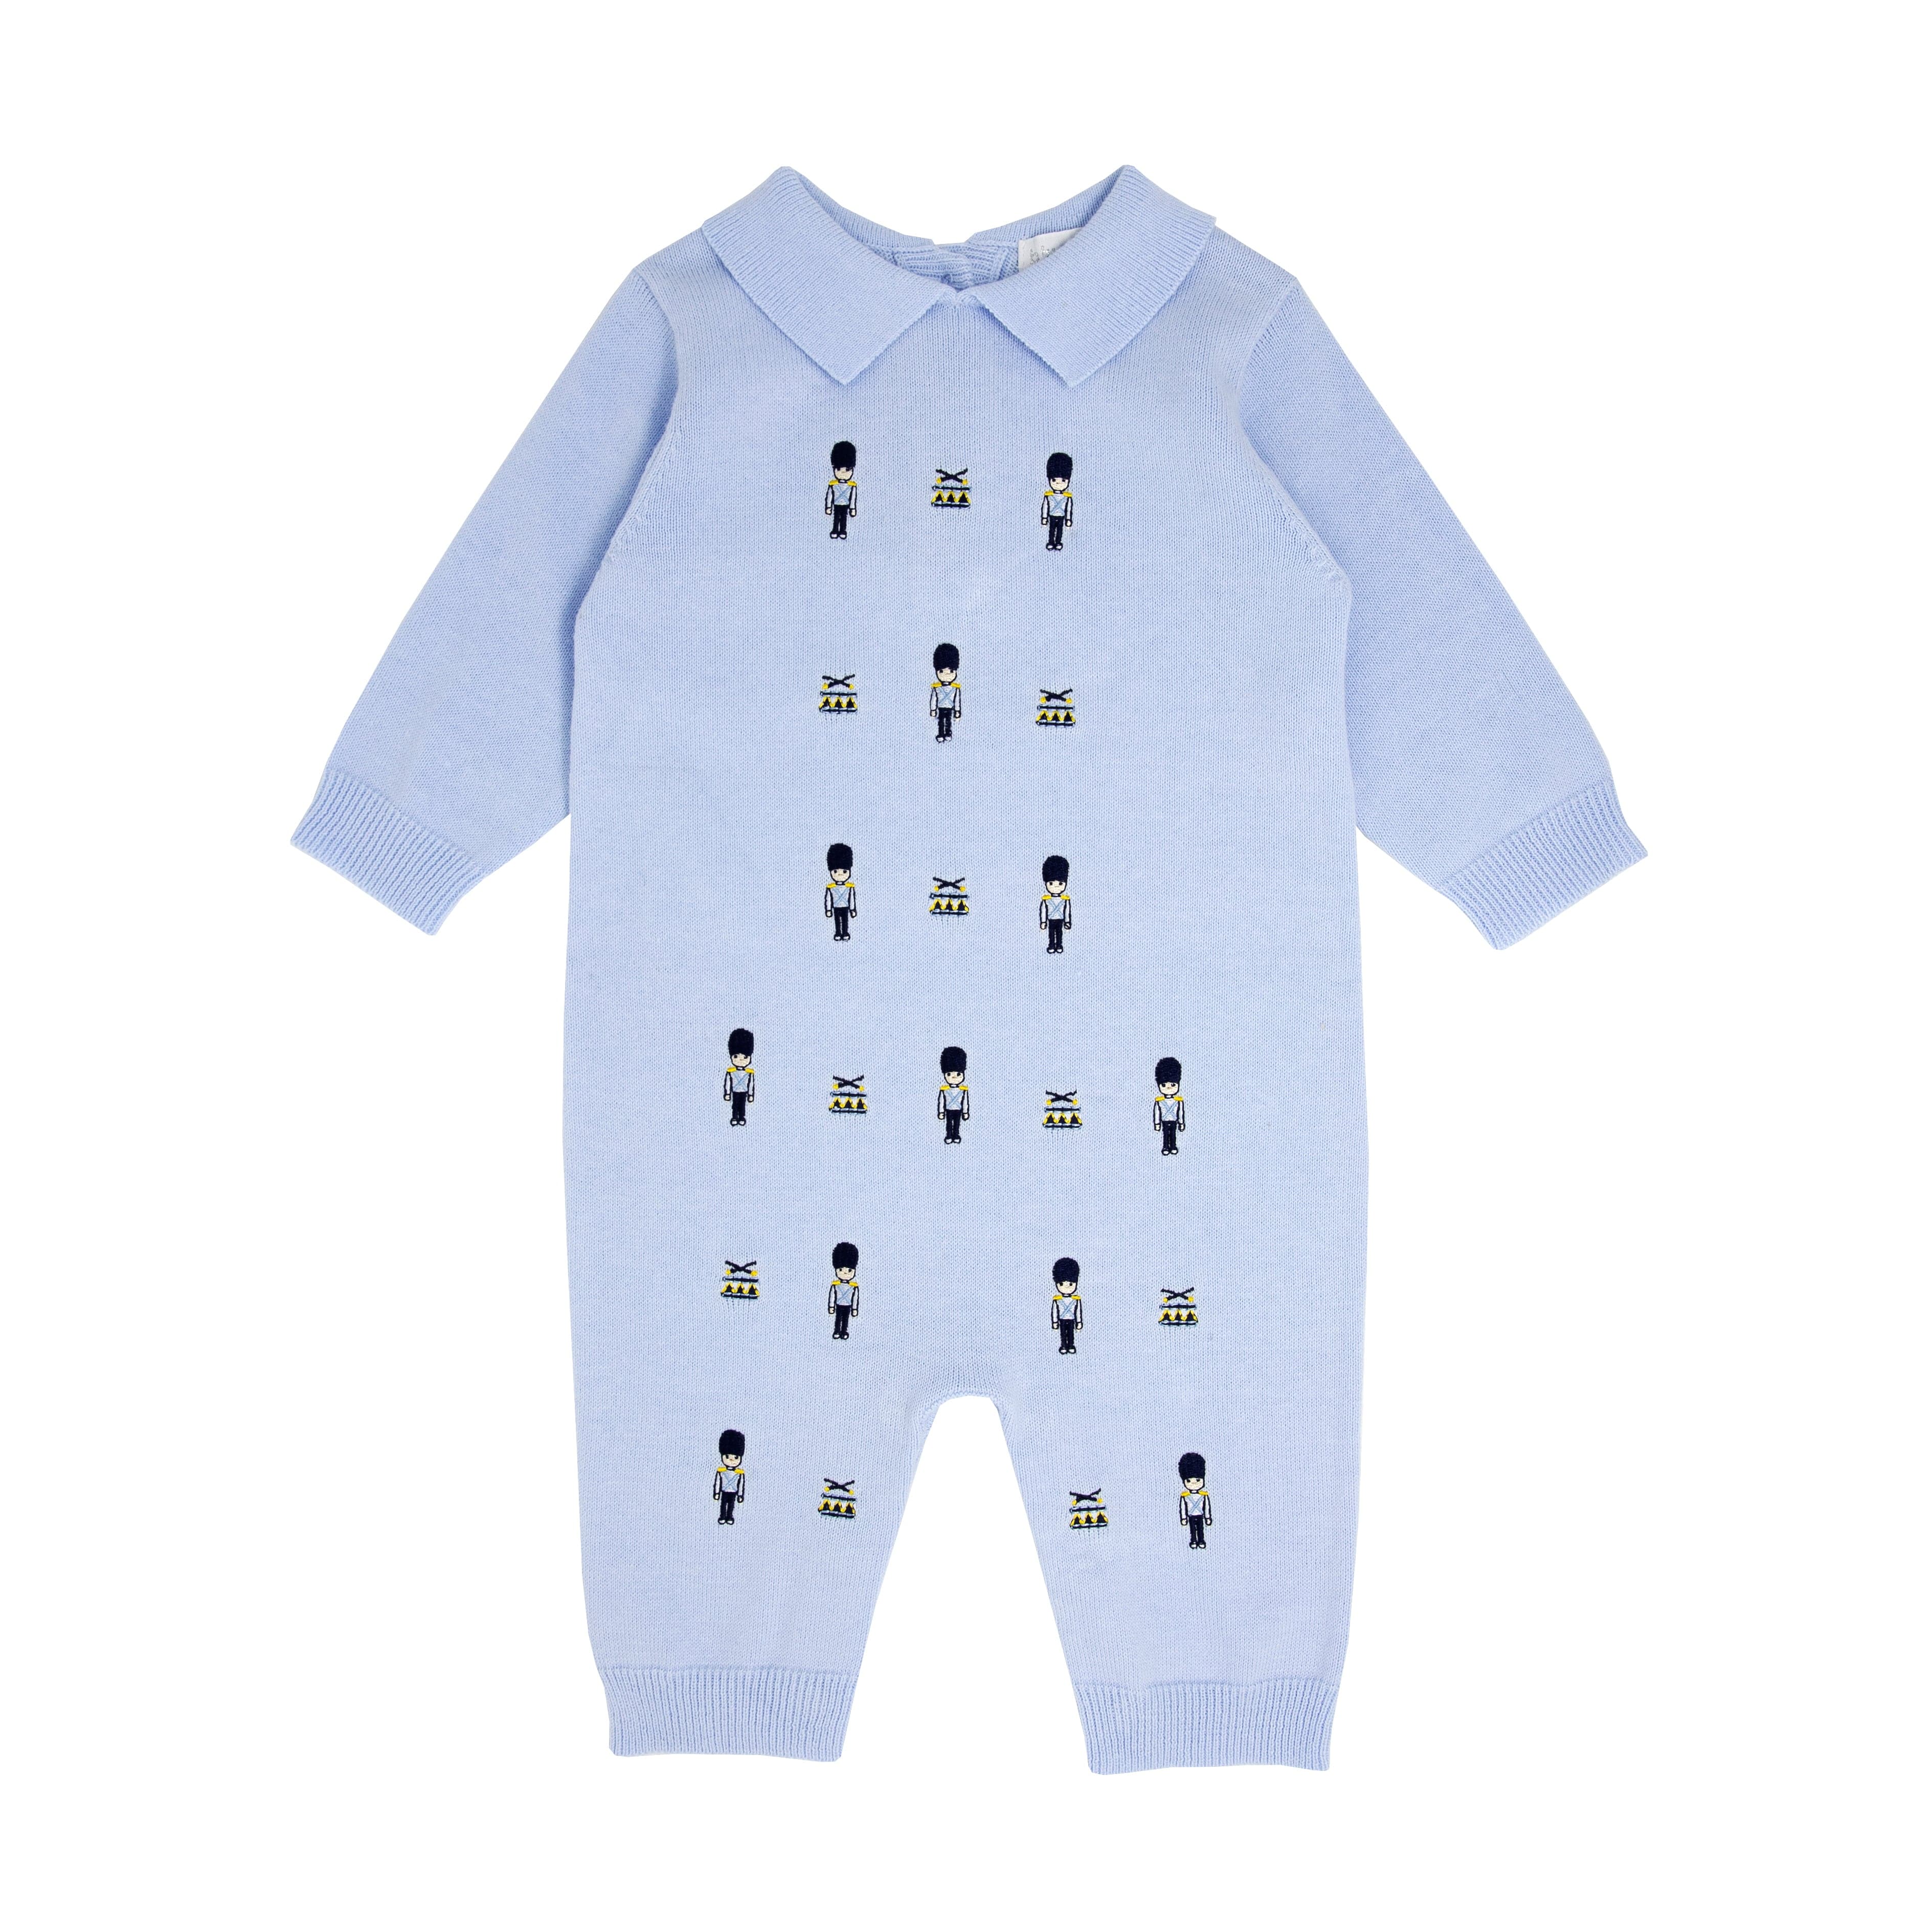 BLUES BABY -  Solider Knit Romper - Blue